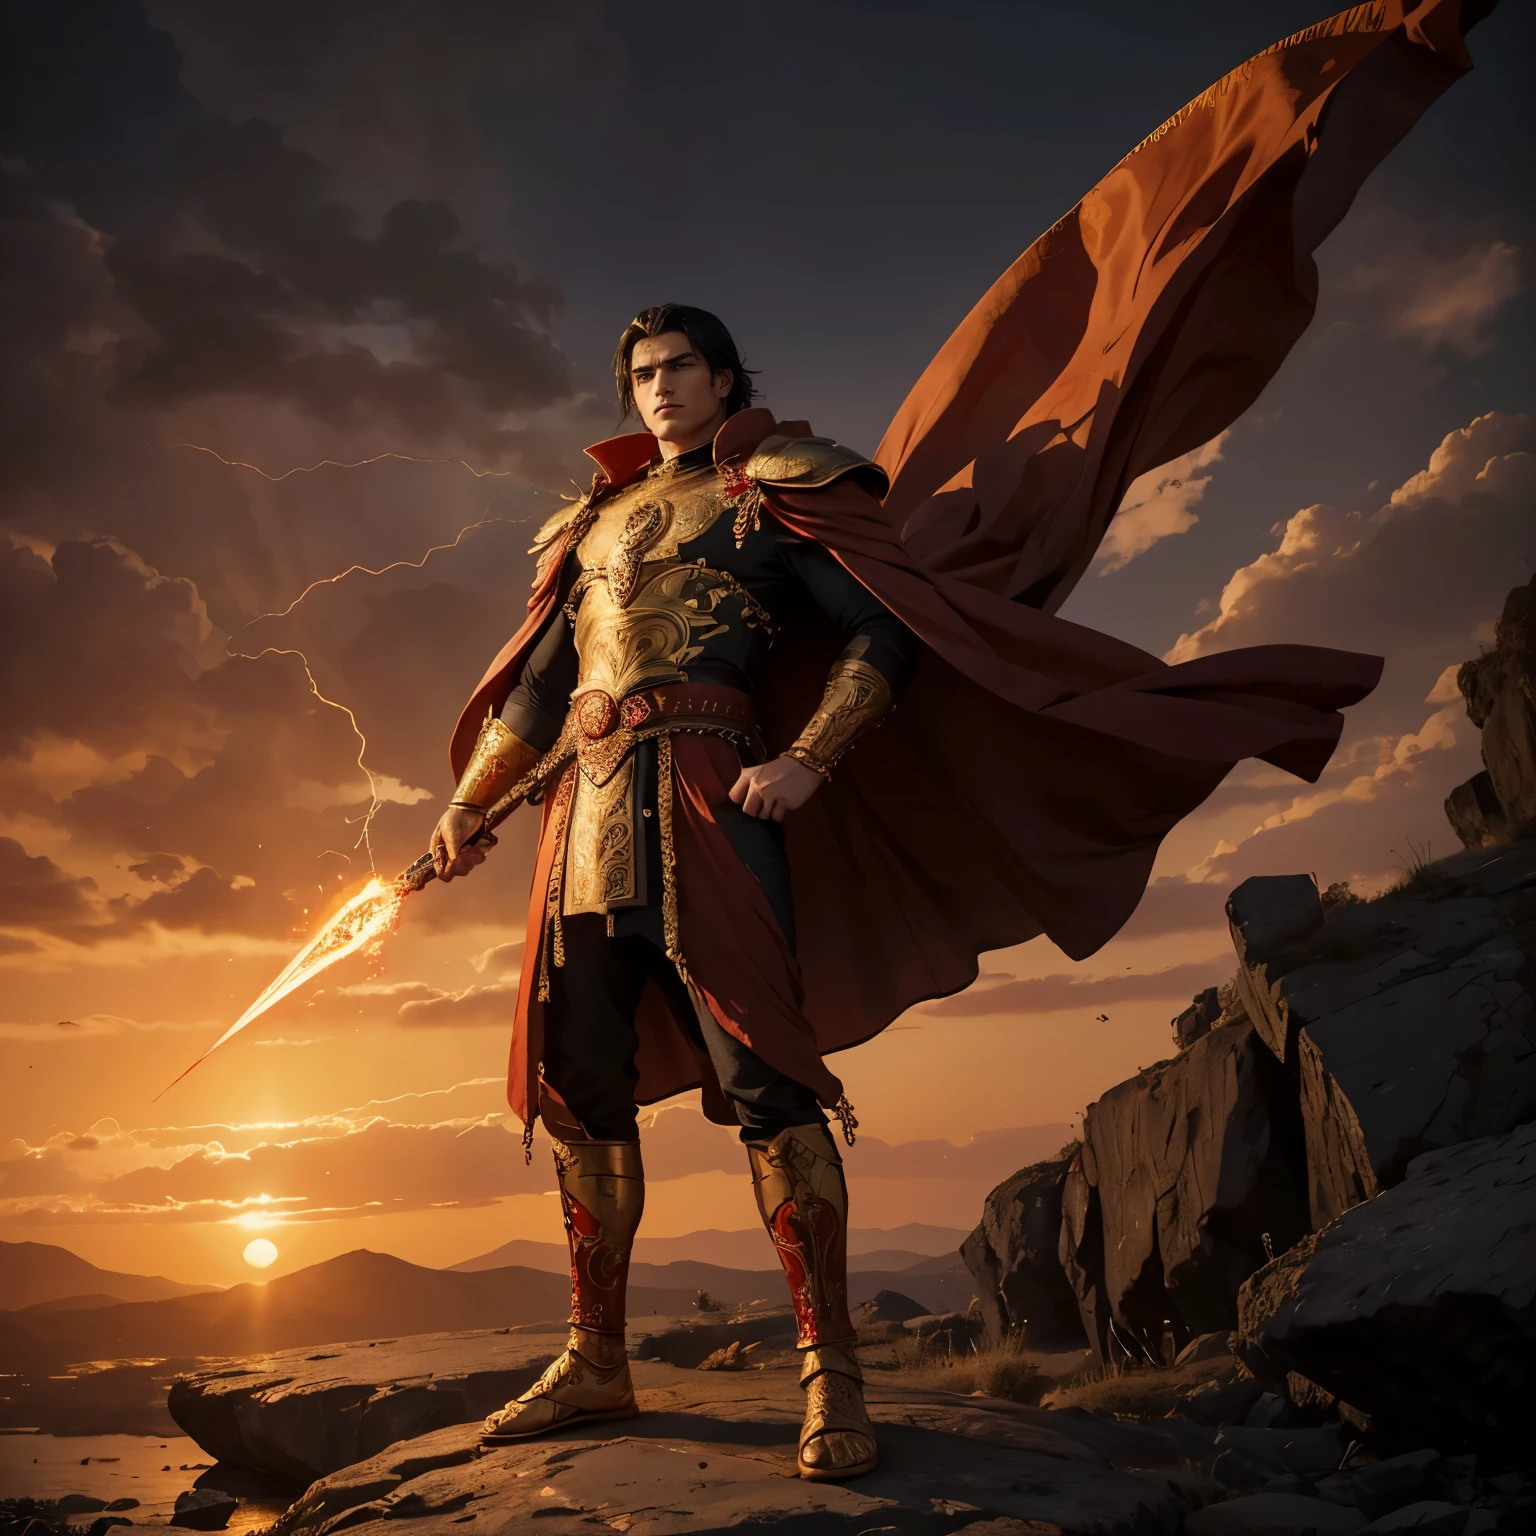 Generate highly detailed, high-quality images of a 25-year-old tall young man with pale skin, small brown eyes, a prominent nose, and thick eyebrows. Clean-shaven with a defined jawline, he has long black hair with a single gray strand. In a full-body image, depict him standing on a dark rock in an imposing pose, embodying the essence of a grand holy warrior.

Adorned in opulent red fabrics inspired by Byzantine aesthetics, featuring intricate golden patterns, he wears a full golden body armor and a long red cape. A ruby jewel graces his forehead. The calamitous background includes destruction, lightning, and fire, with the rising sun symbolizing hope on the horizon.

Capture the character covered in his own blood, bearing wounds, surrounded by intense magical red energy swirling around his body. Emphasize the highest quality and intricate details to vividly bring this compelling scene to life.